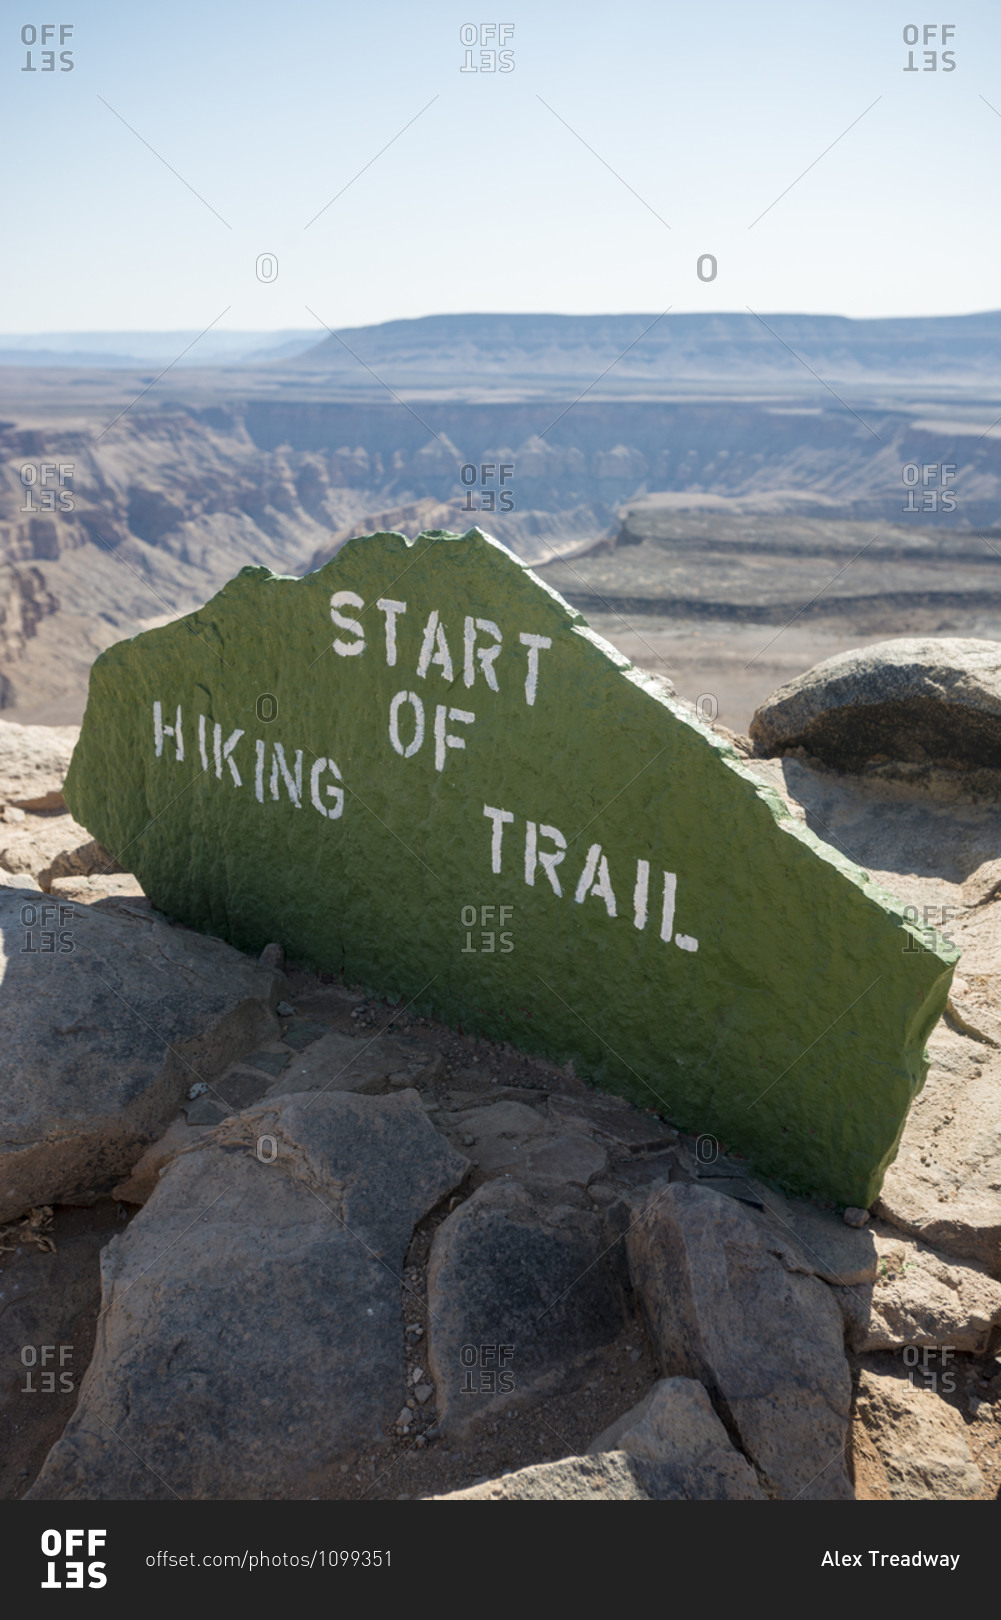 A stone sign marks the beginning of the hiking trail into the Fish River Canyon in Namibia